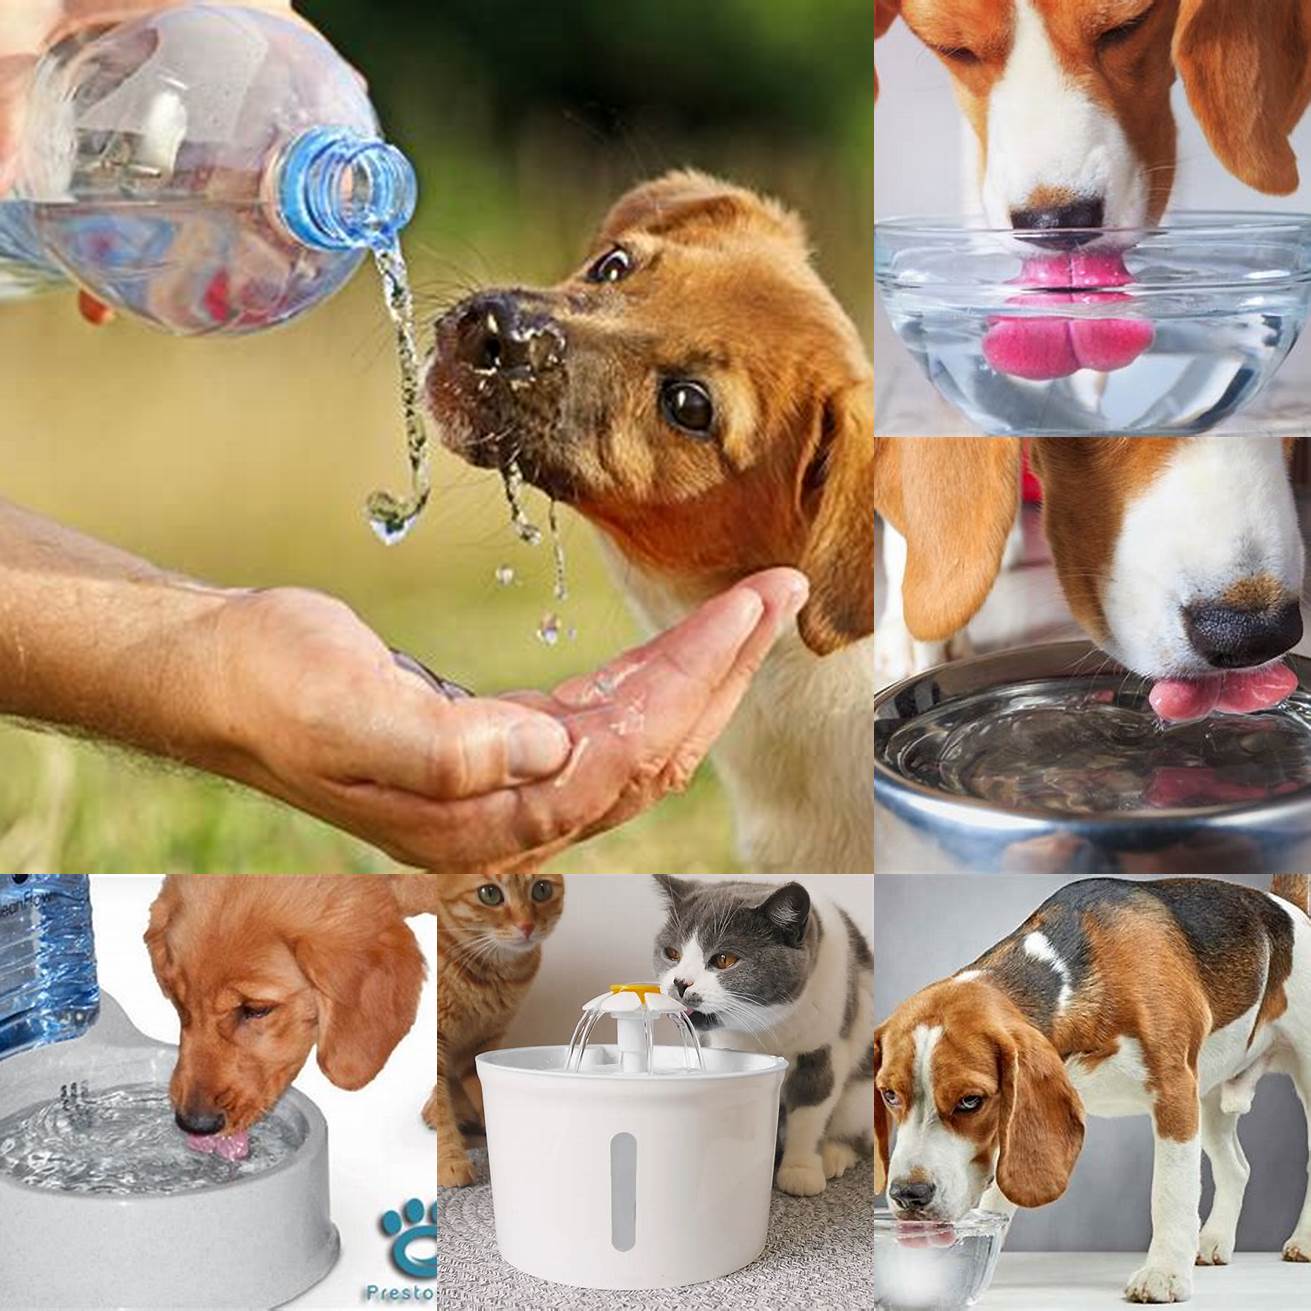 Provide your dog with plenty of fresh water at all times